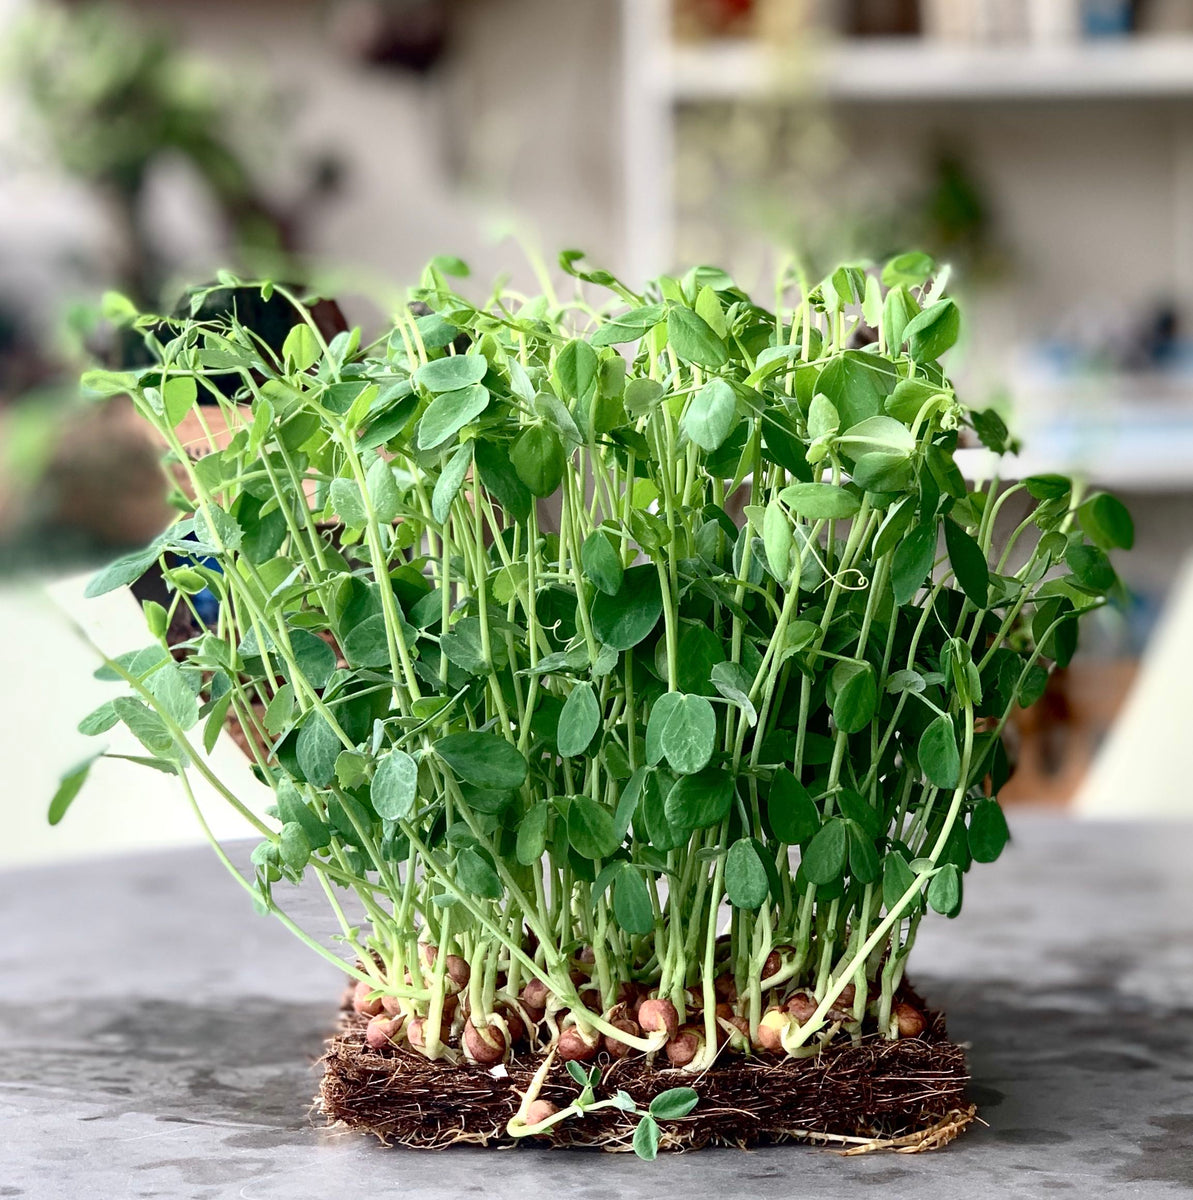 Singapore, Organic seeds, gmo free, microgreen, vegetable seeds, grow edibles, farm edibles, urban harvest, workshop, untreated vegetable seeds, urban sproutz, grow your own kits singapore, gardening kits, sustainable gifts, organic plant seeds, 